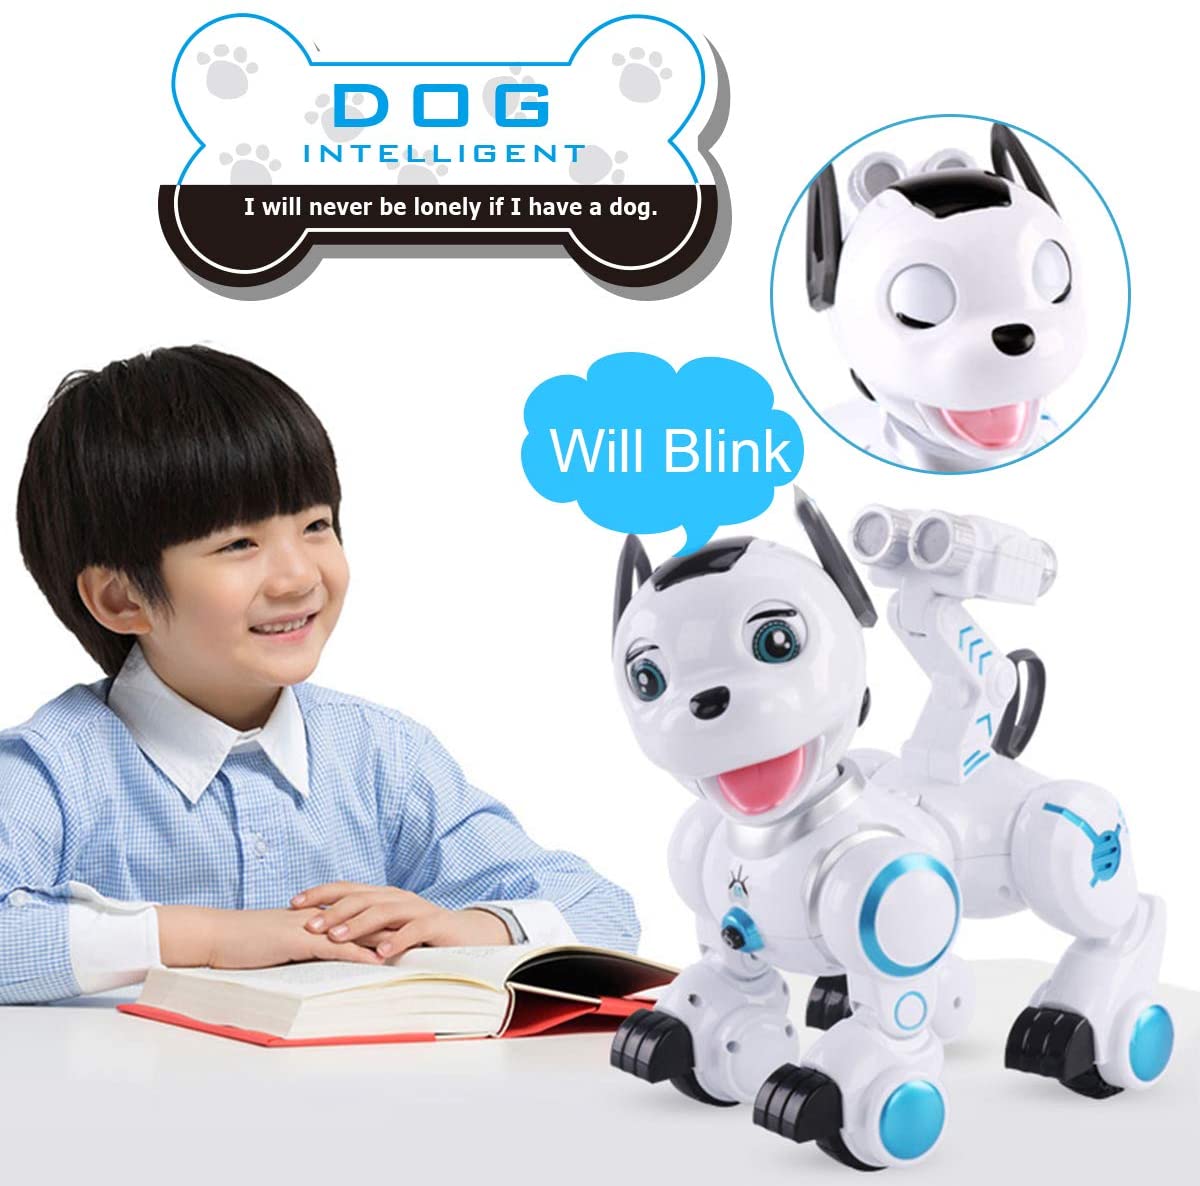 Remote Control Robotic Dog RC Interactive Intelligent Walking Dancing Programmable Robot Puppy Toys Electronic Pets with Light and Sound for Kids Boys Girls - MGA STAR MARKETING 